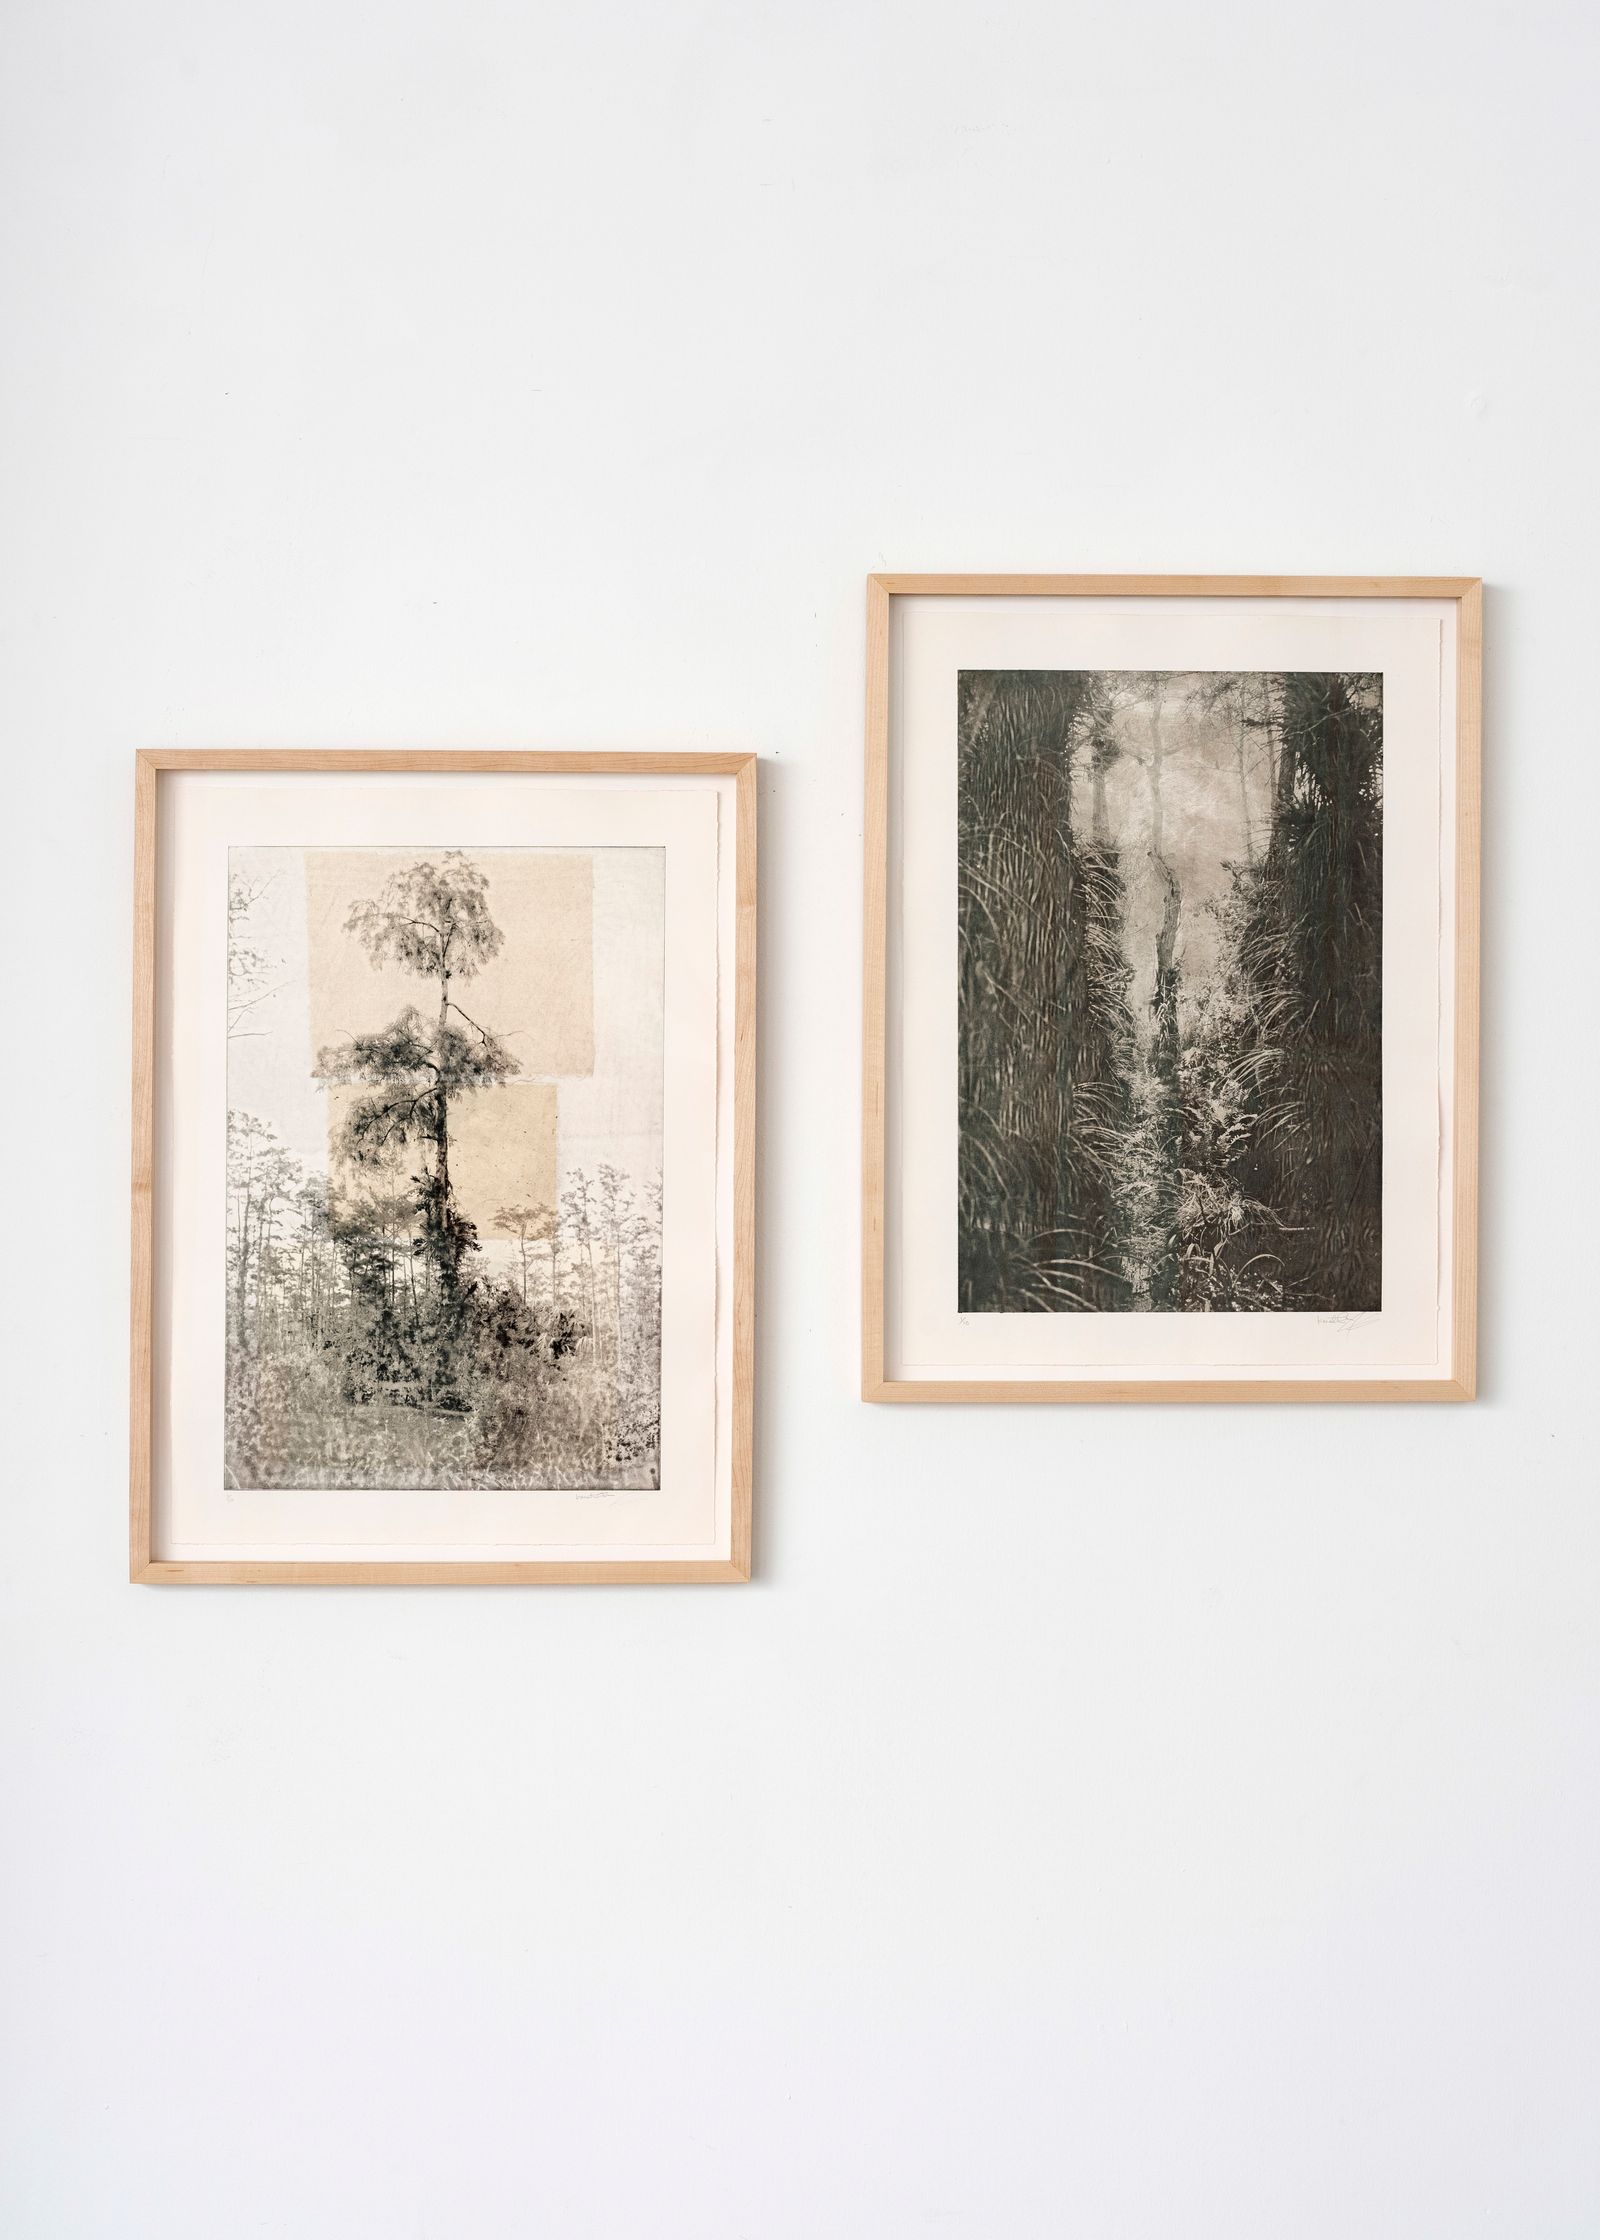 © Itamar Freed - Cypress Tree I+II, 2019, Etching with chine colle on Zerkyl Natural 63 x 47 cm each